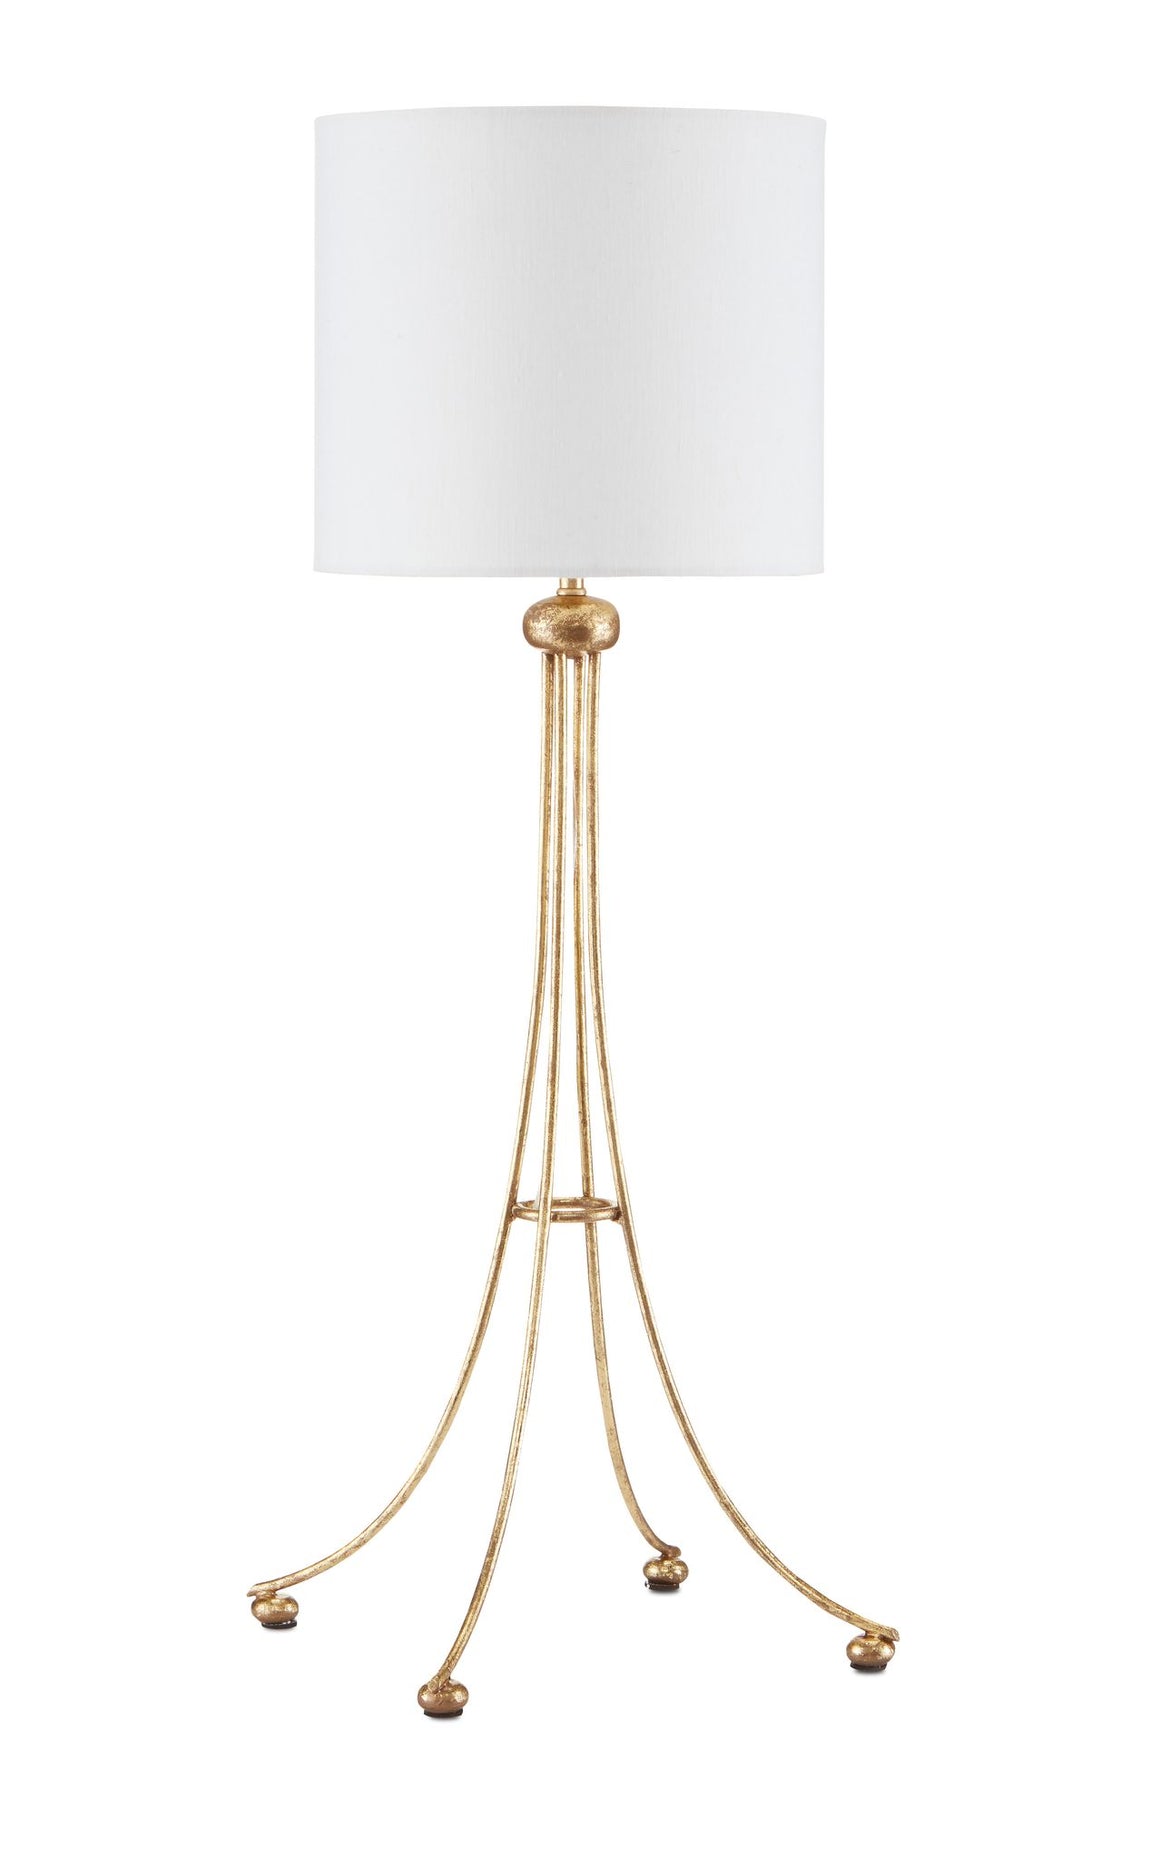 Currey and Company Chesterton Large Table Lamp - Gold Leaf